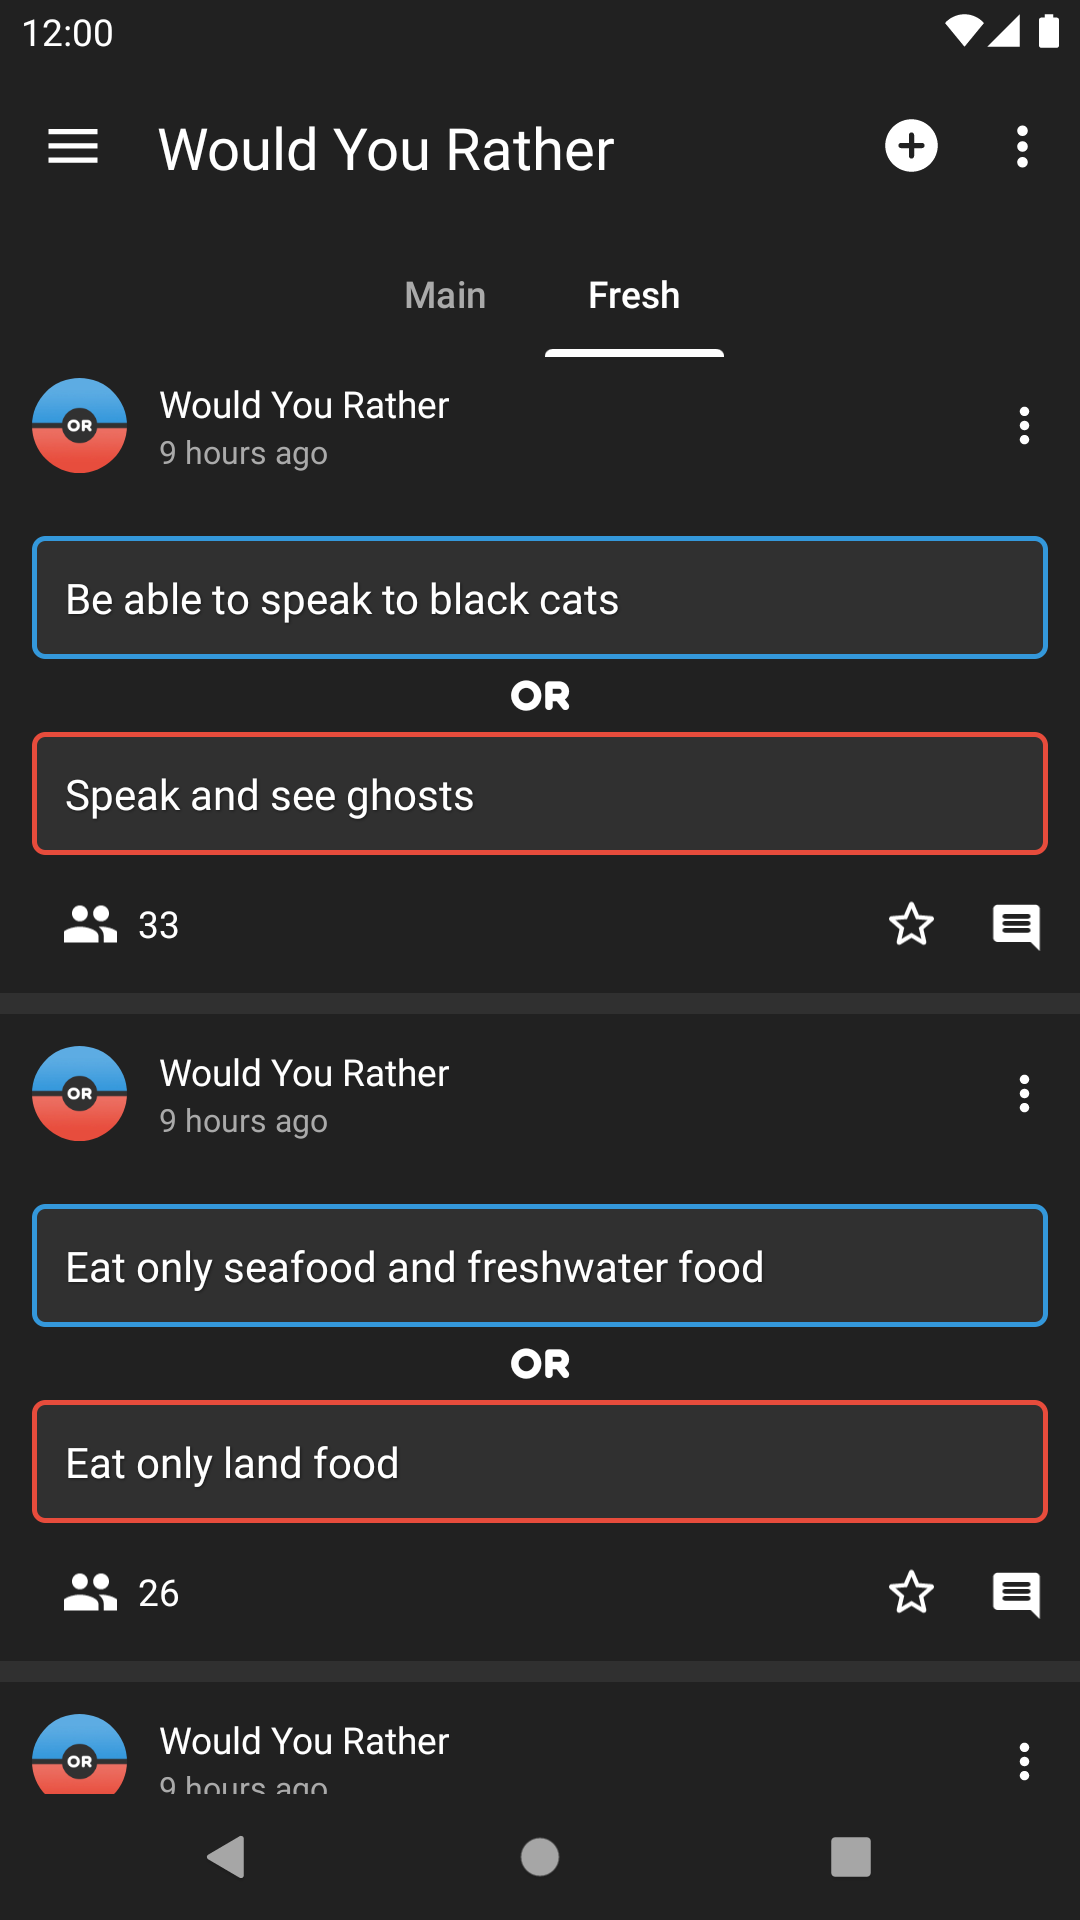 Would You Rather - Screenshot 5.png